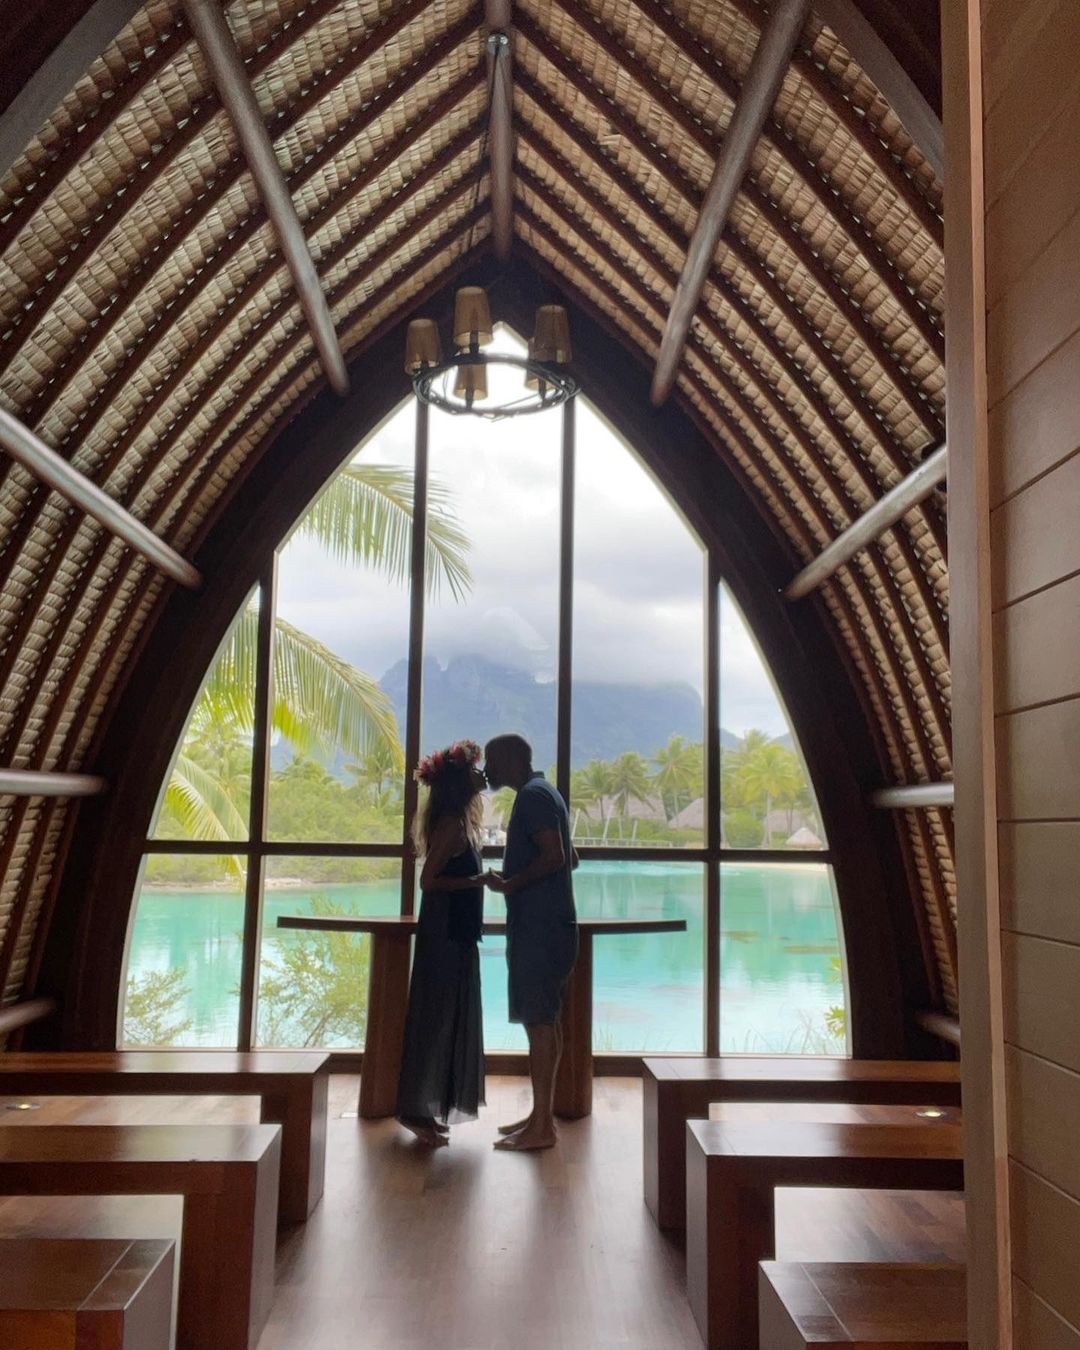 Halle Berry shares photo of new-husband Van Hunt as pair enjoy private wedding on unknown tropical island.